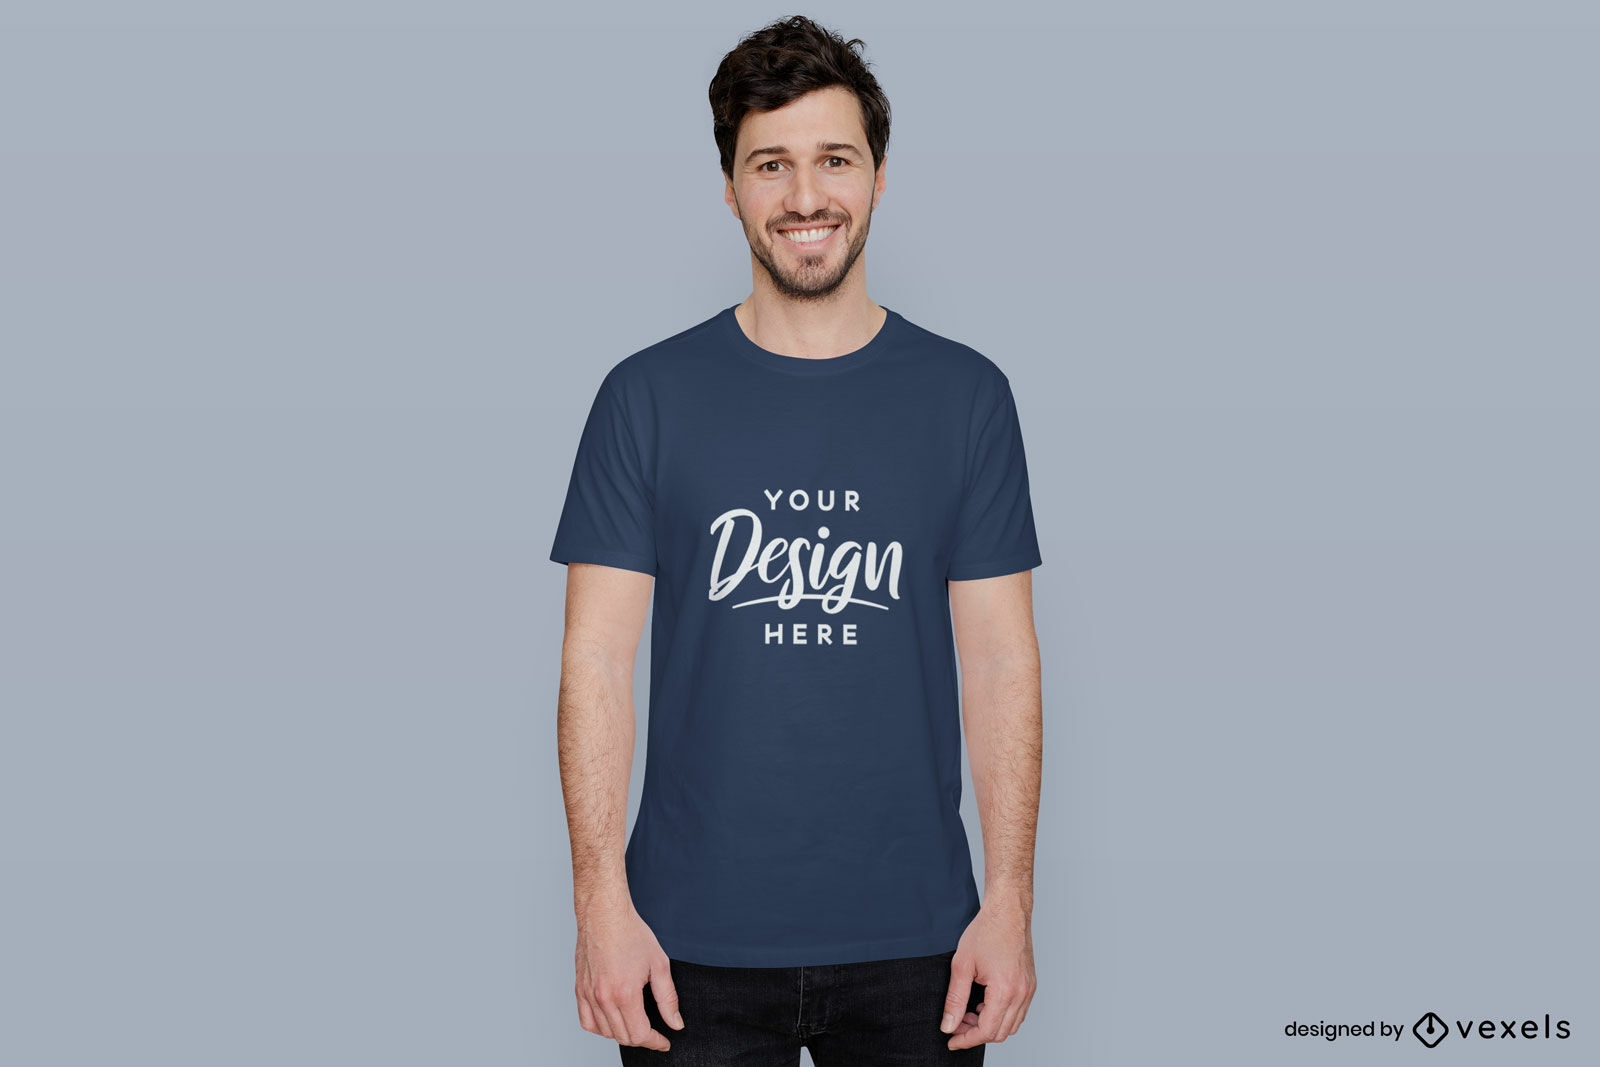 PSD Blue T-Shirt Front View Mockup